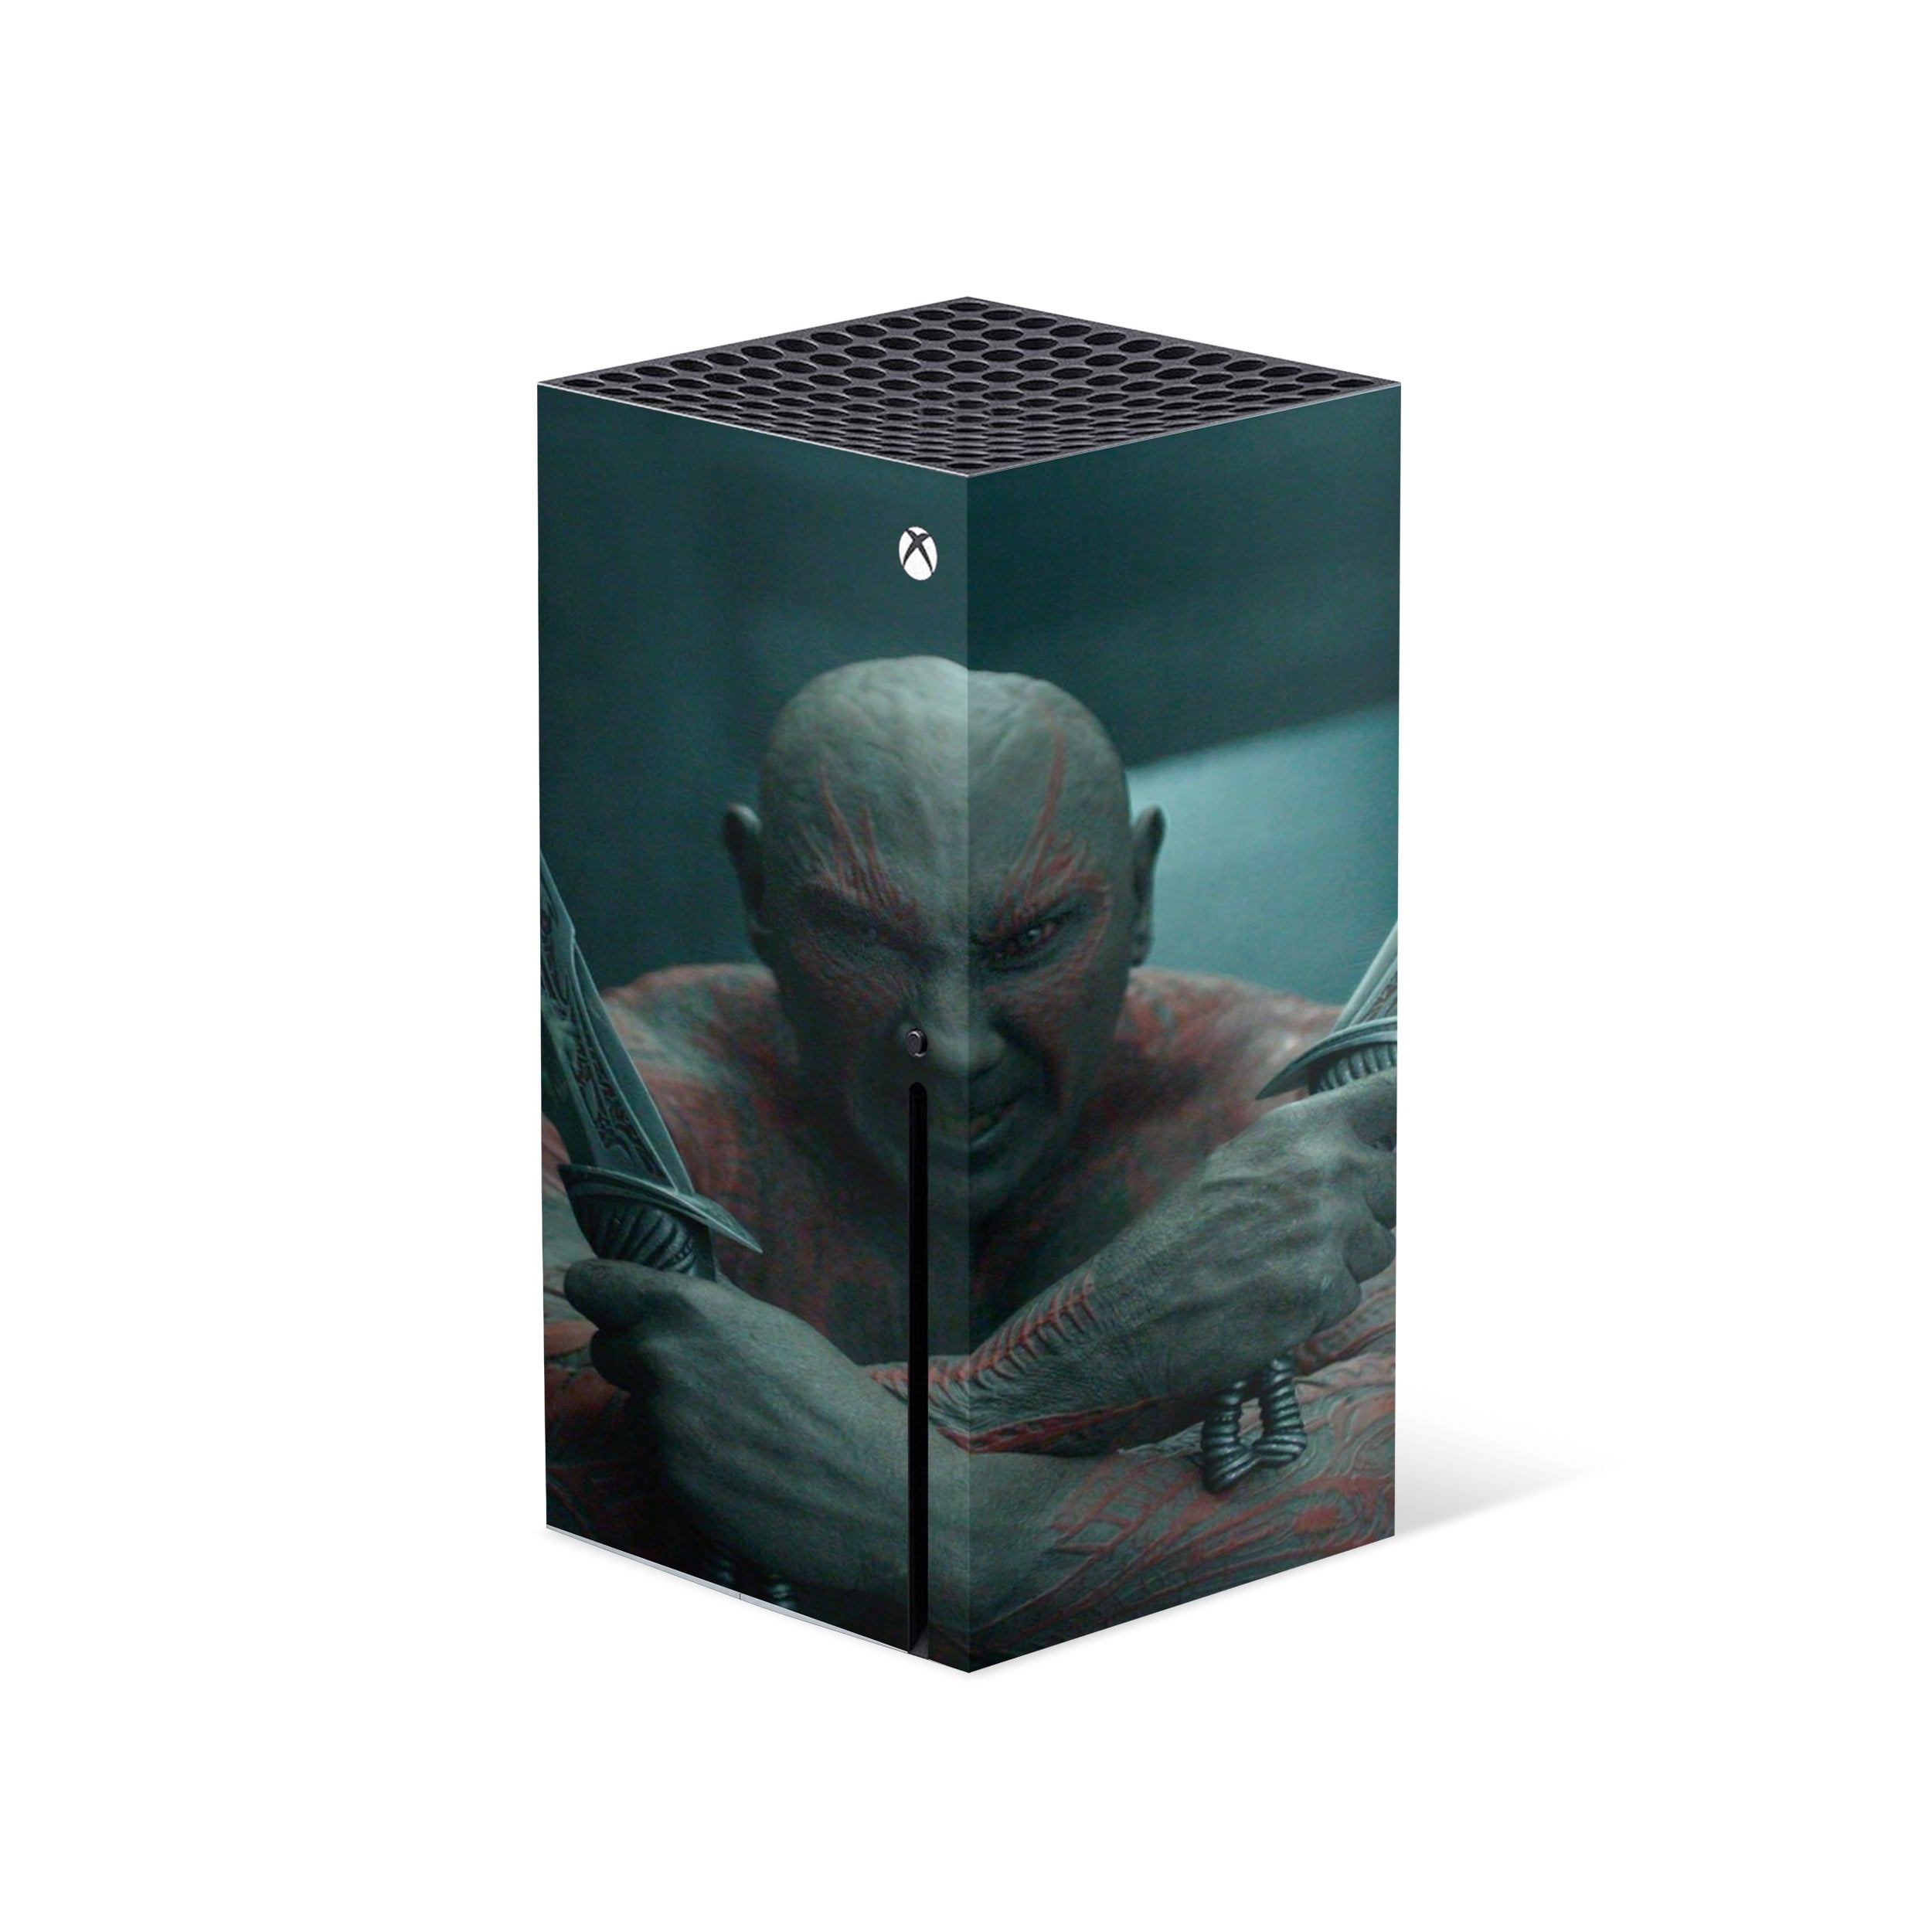 A video game skin featuring a Marvel Guardians of the Galaxy Drax design for the Xbox Series X.